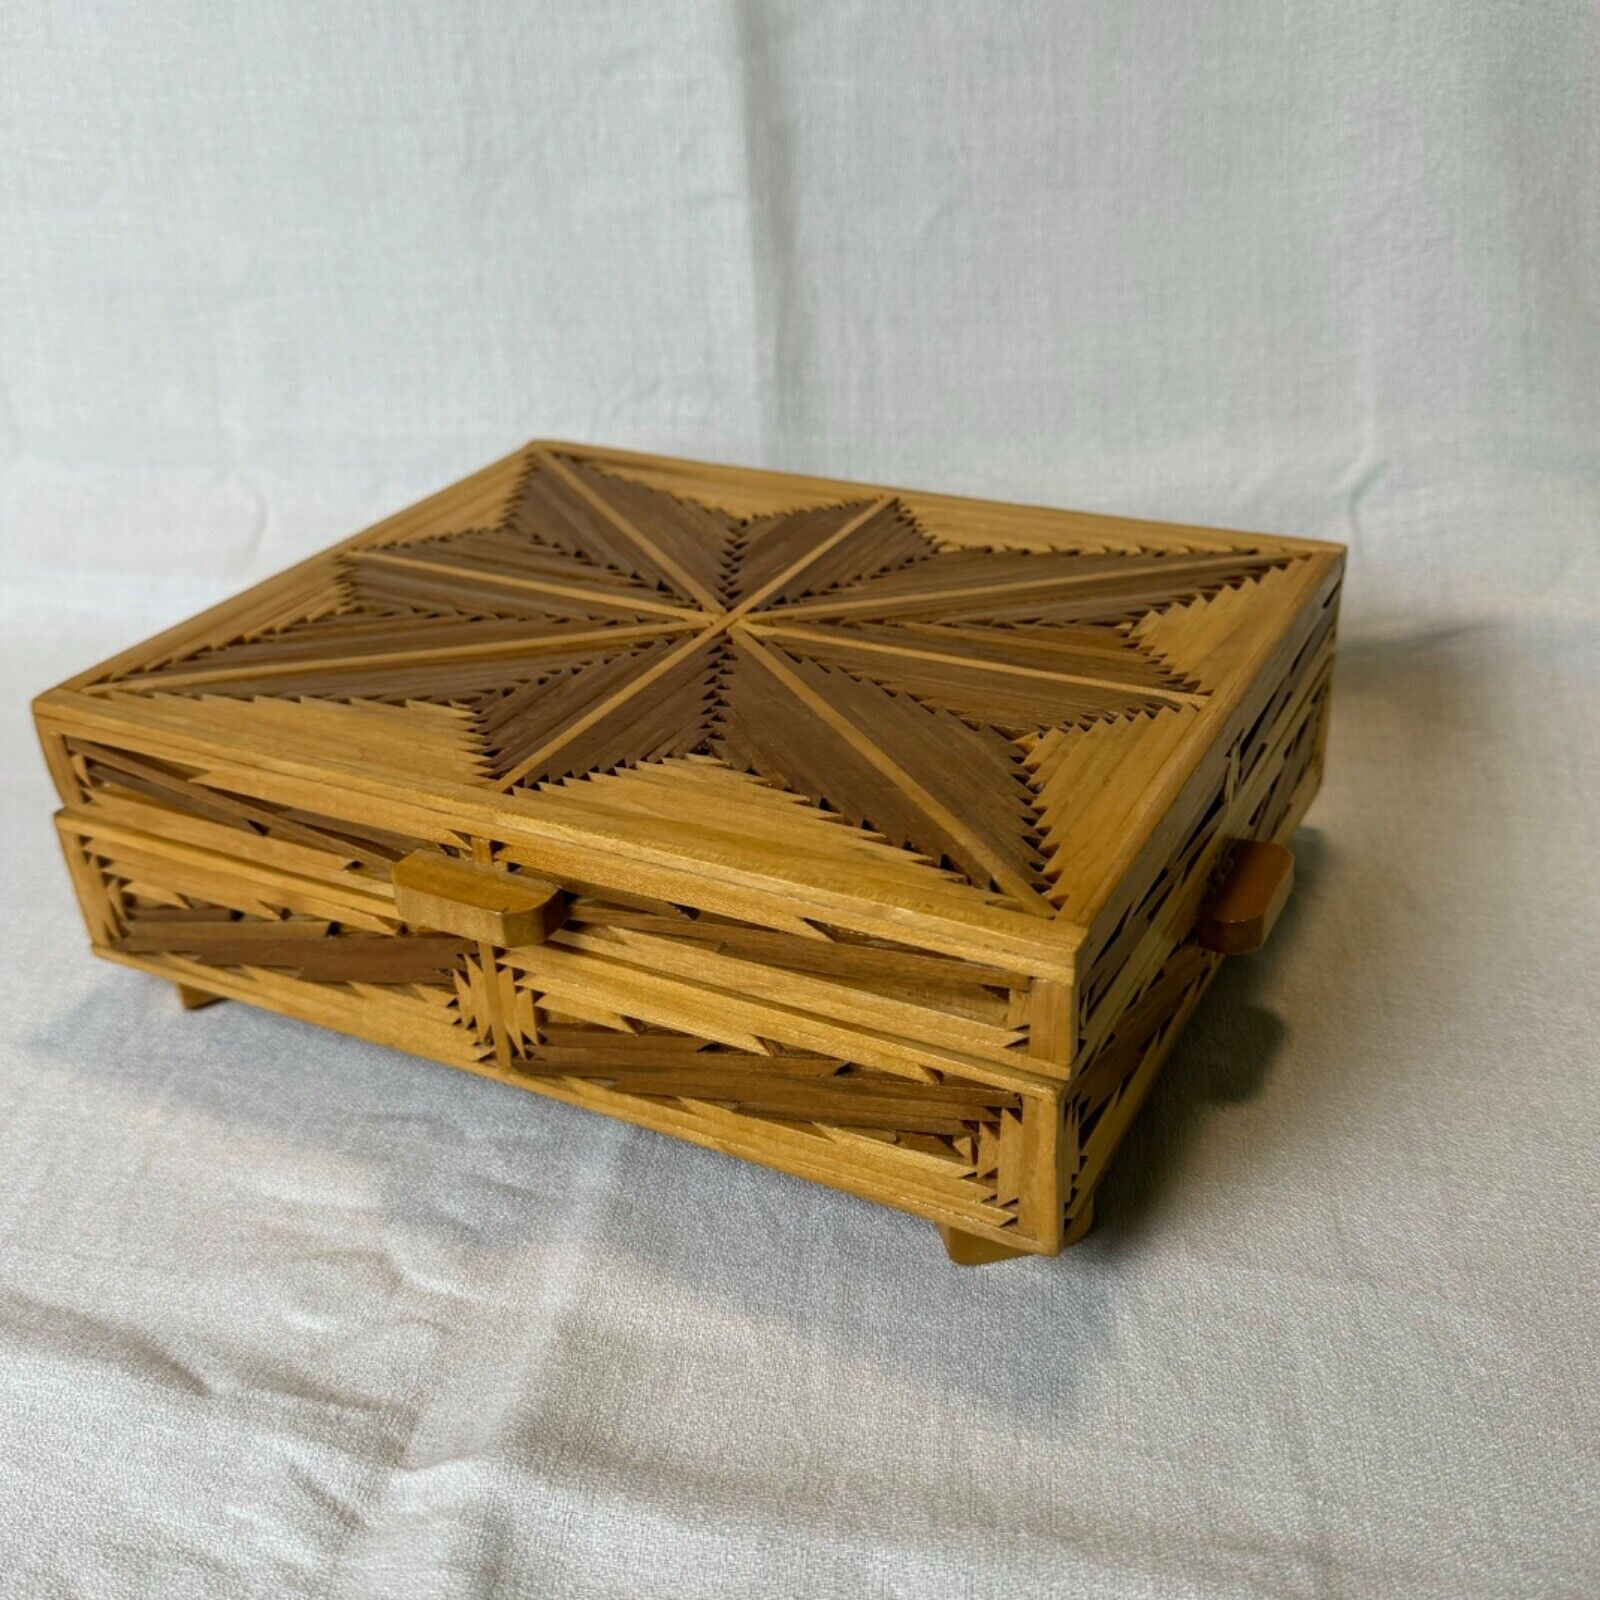 VTG Matchstick Tramp Art Jewelry Box Wood 9.75 x 7.75 x 3.25 Suede Lined